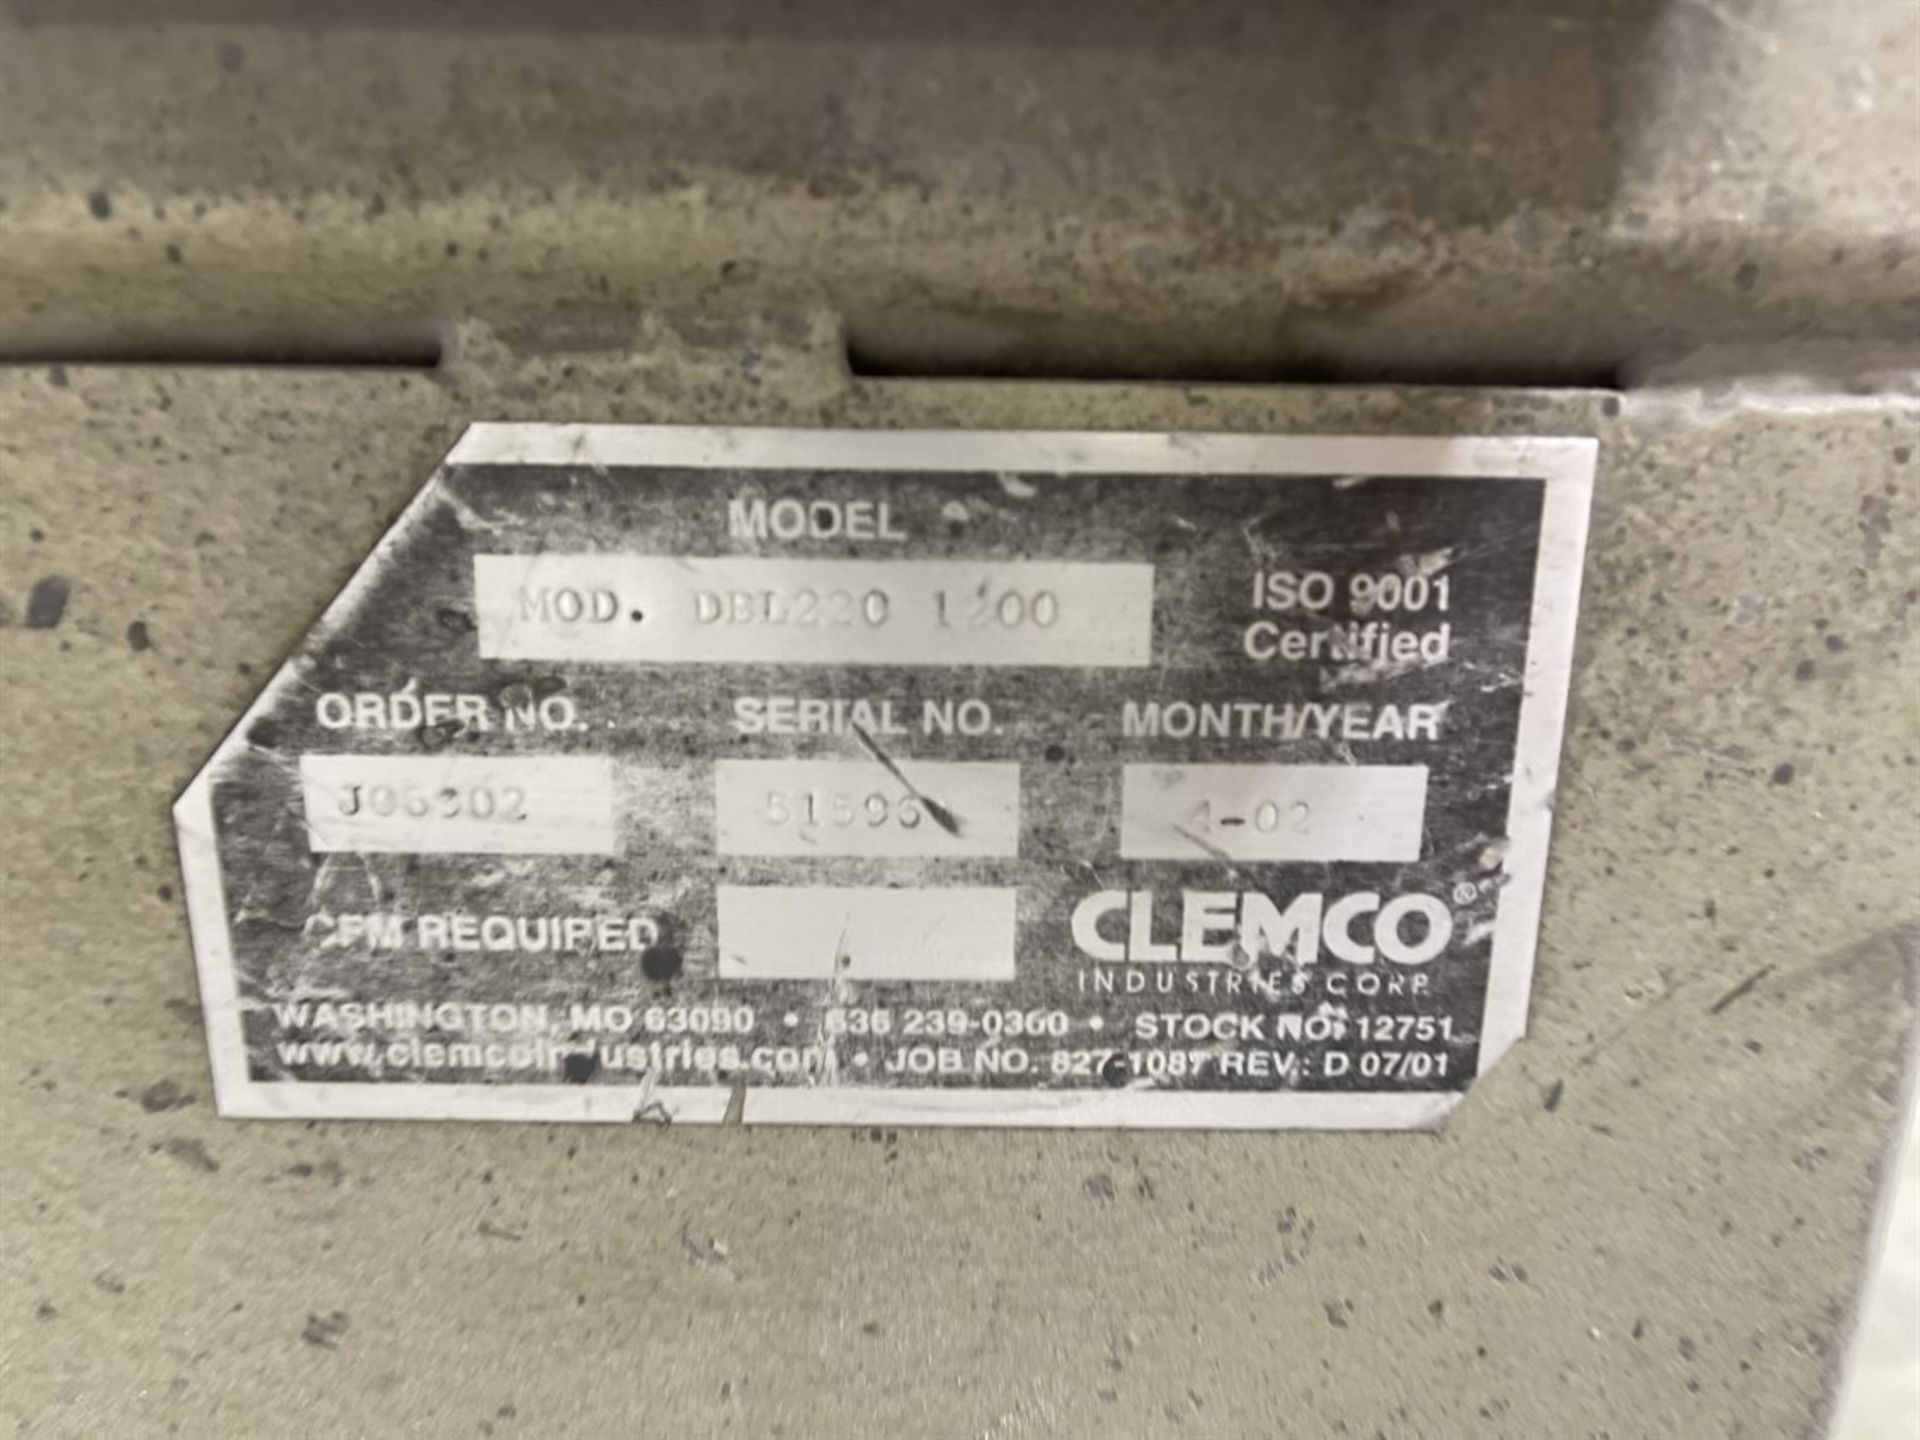 CLEMCO Dual Cabinet Blasting System, DBL 220 1200, s/n 51596 - Image 4 of 5